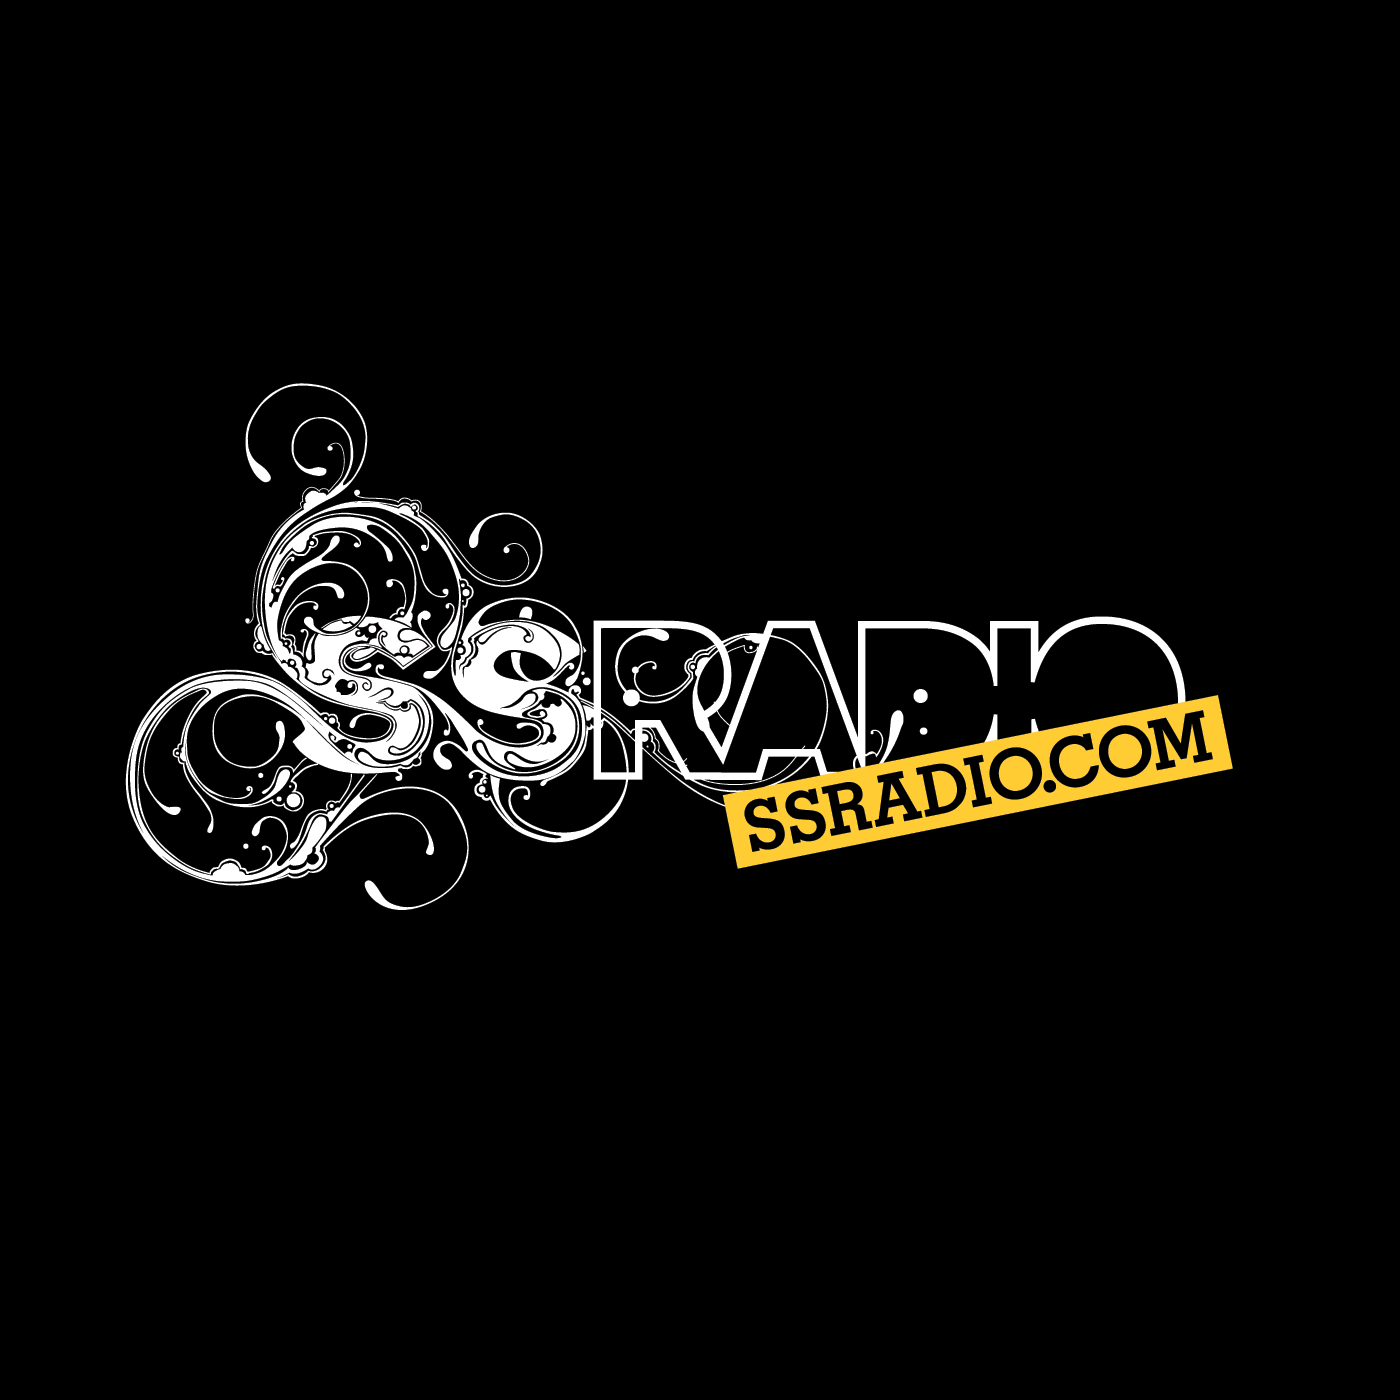 Soultronic – SSRadio